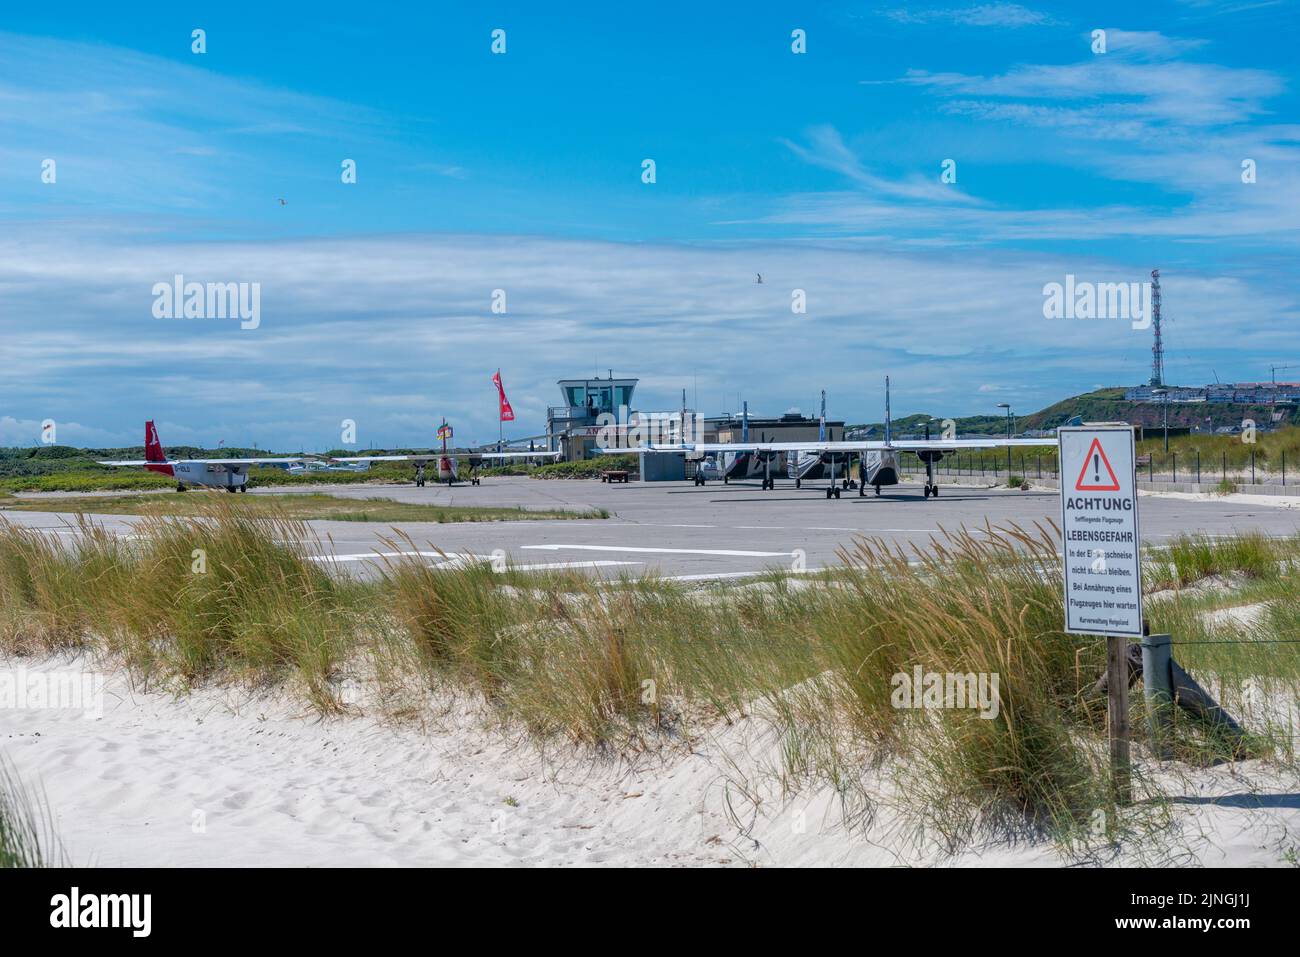 Small airport on the high seas island The Dune, part of Heligoland, district Pinneberg, Schleswig-Holstein, Northern Germany Stock Photo